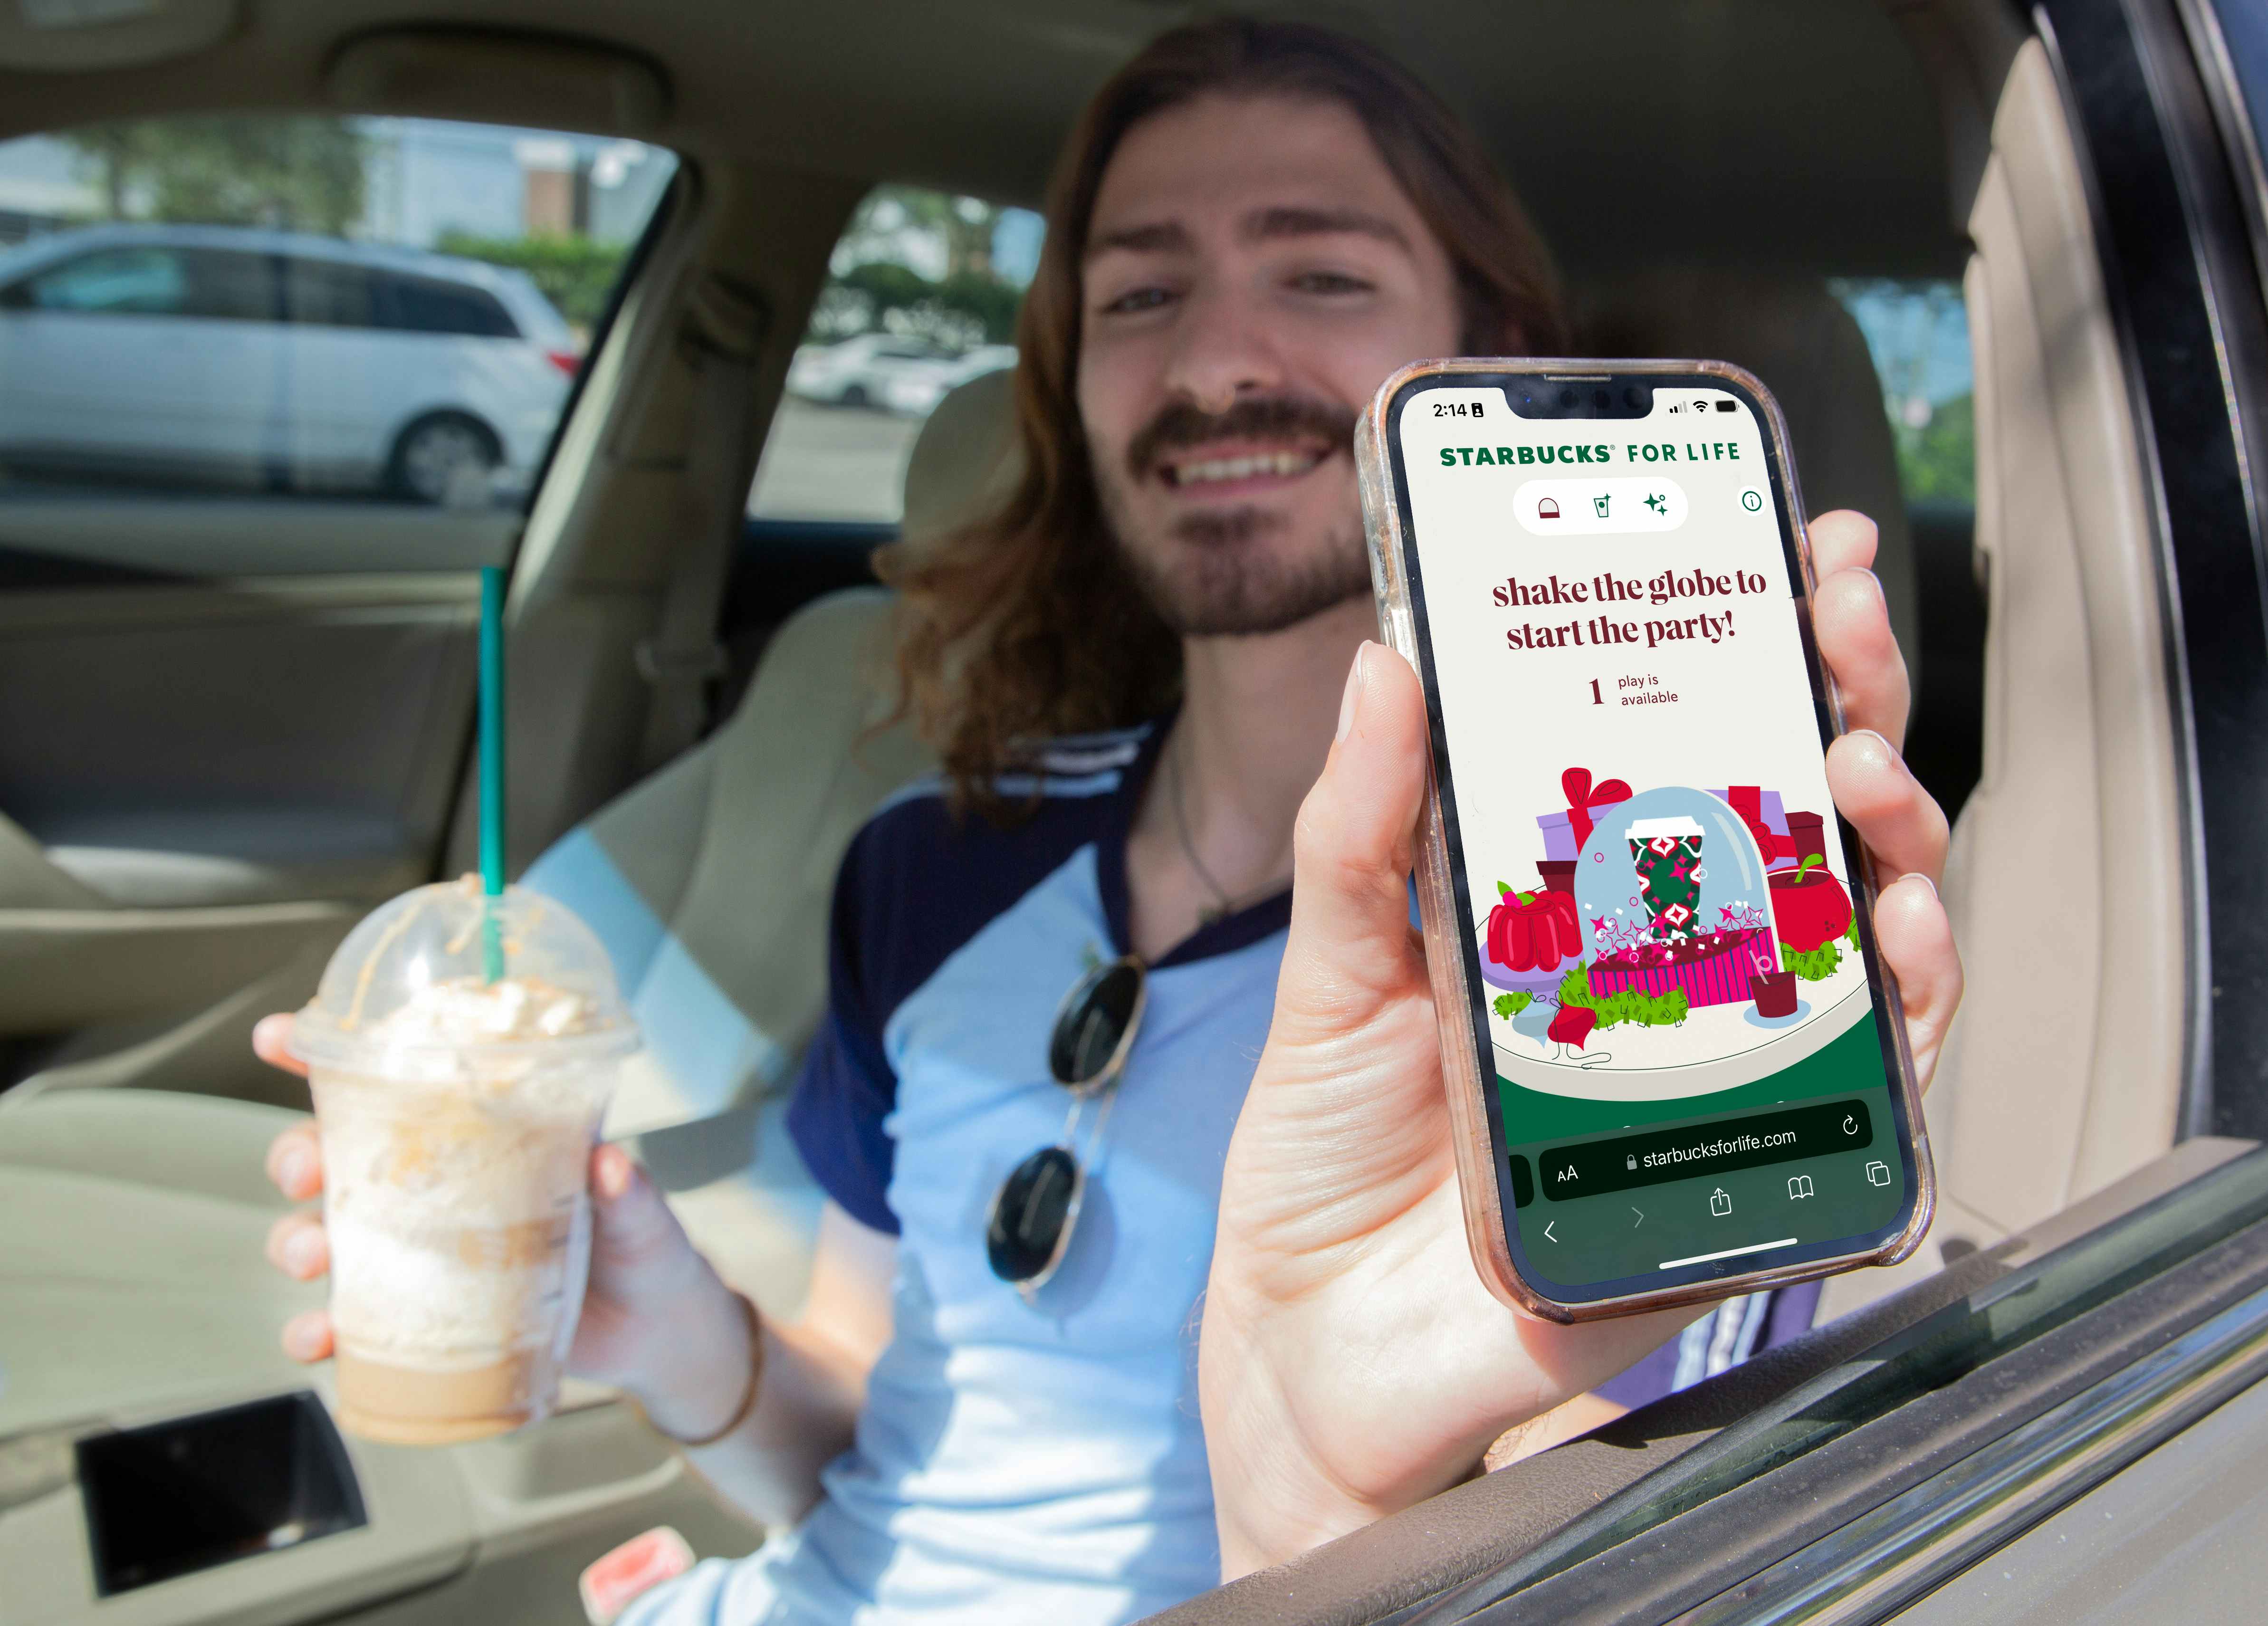 Person holding a phone while holding a starbucks cup while sitting in the car